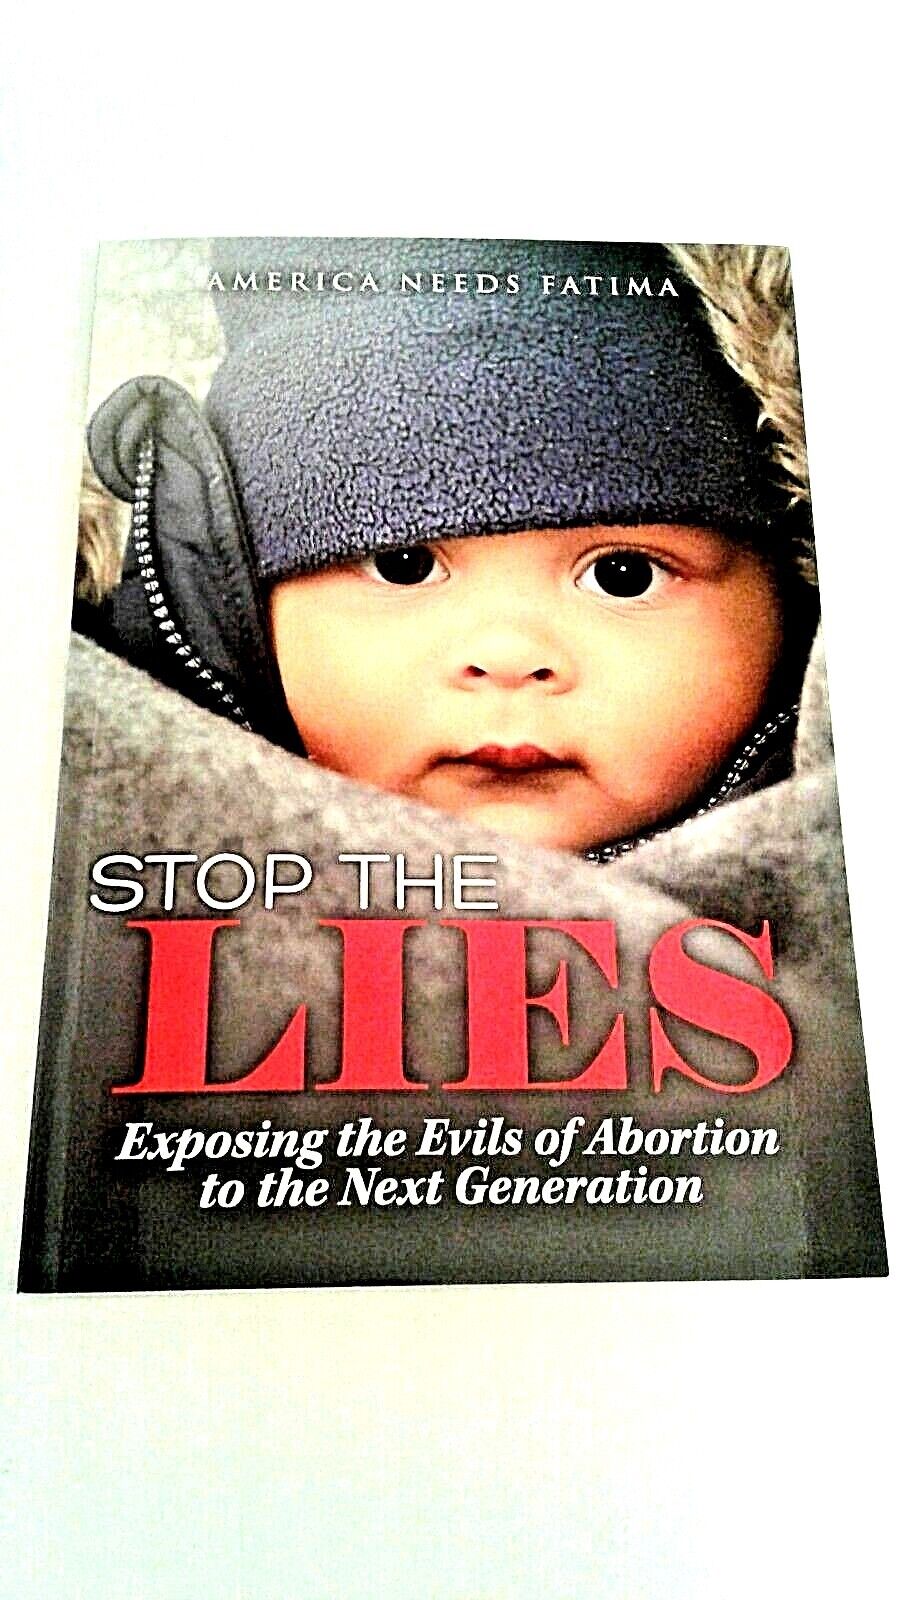 Abortion Stop The Lies Book America Needs Fatima Exposing the Evils of 2017 ANF